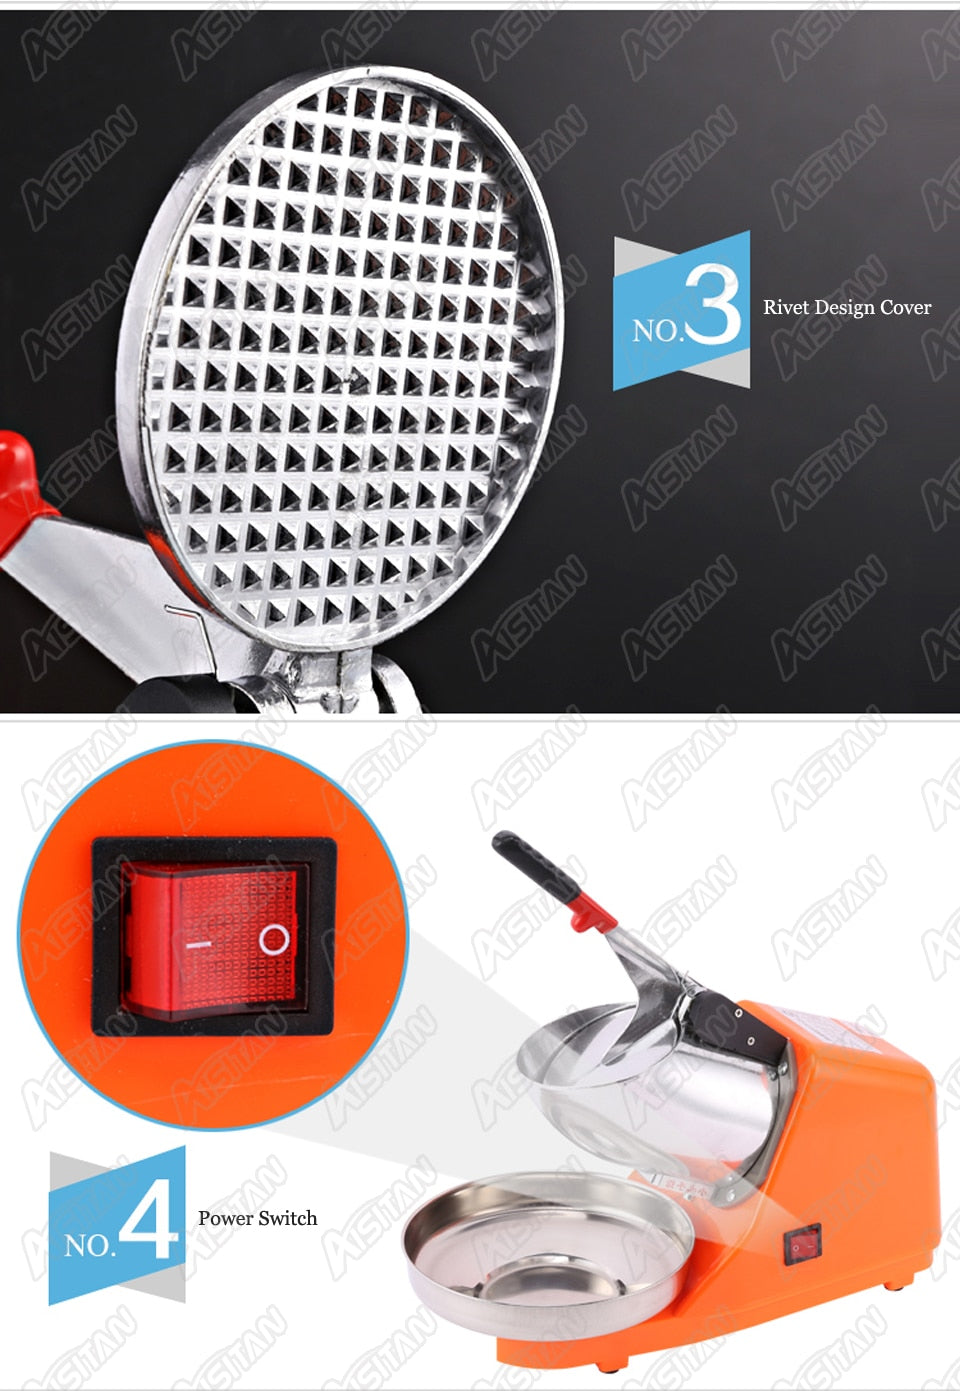 Portable Ice Crusher & Shaved Ice Machine with Free Ice Cube Trays